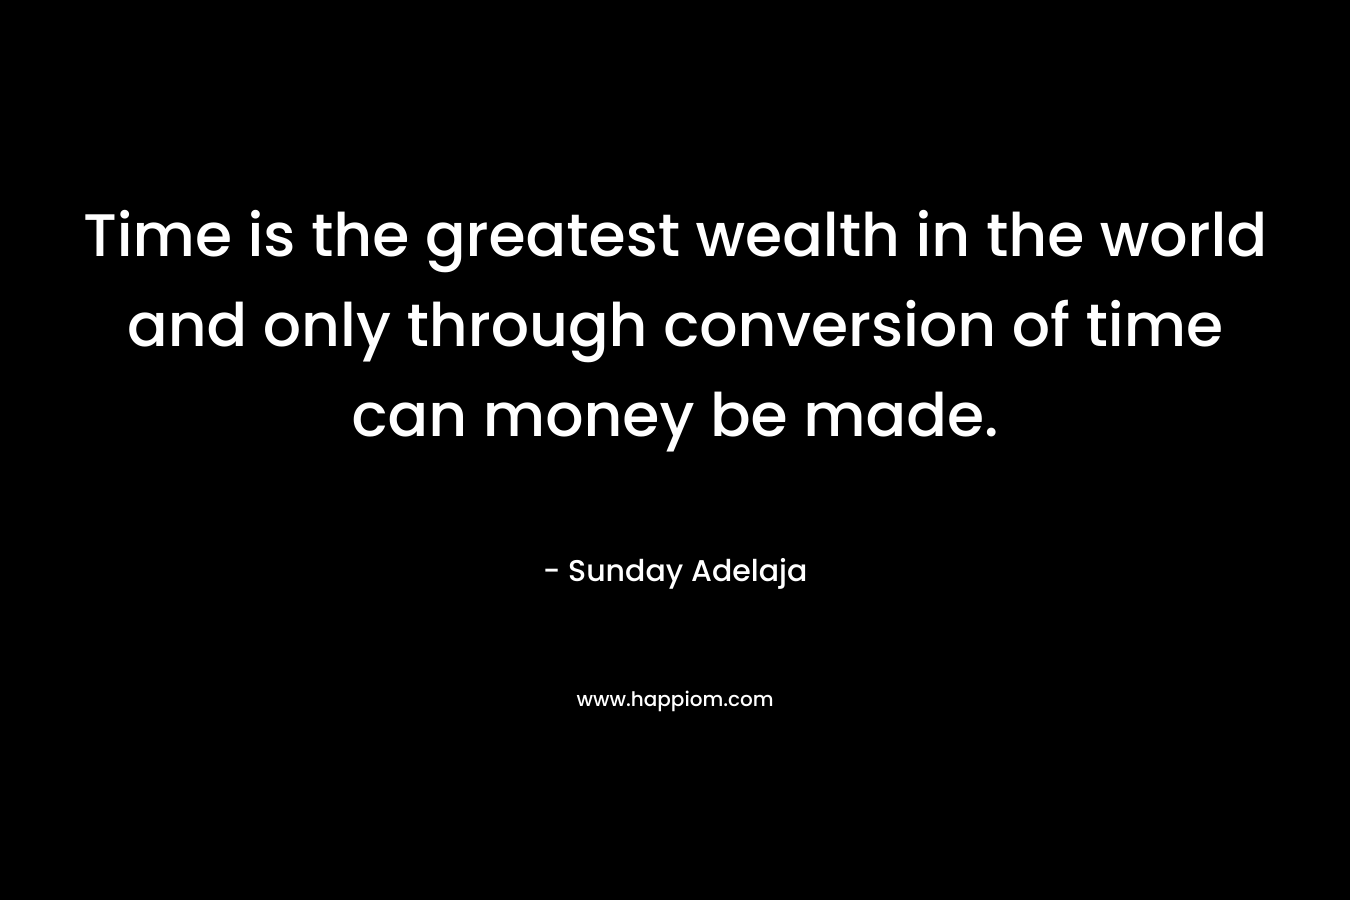 Time is the greatest wealth in the world and only through conversion of time can money be made.